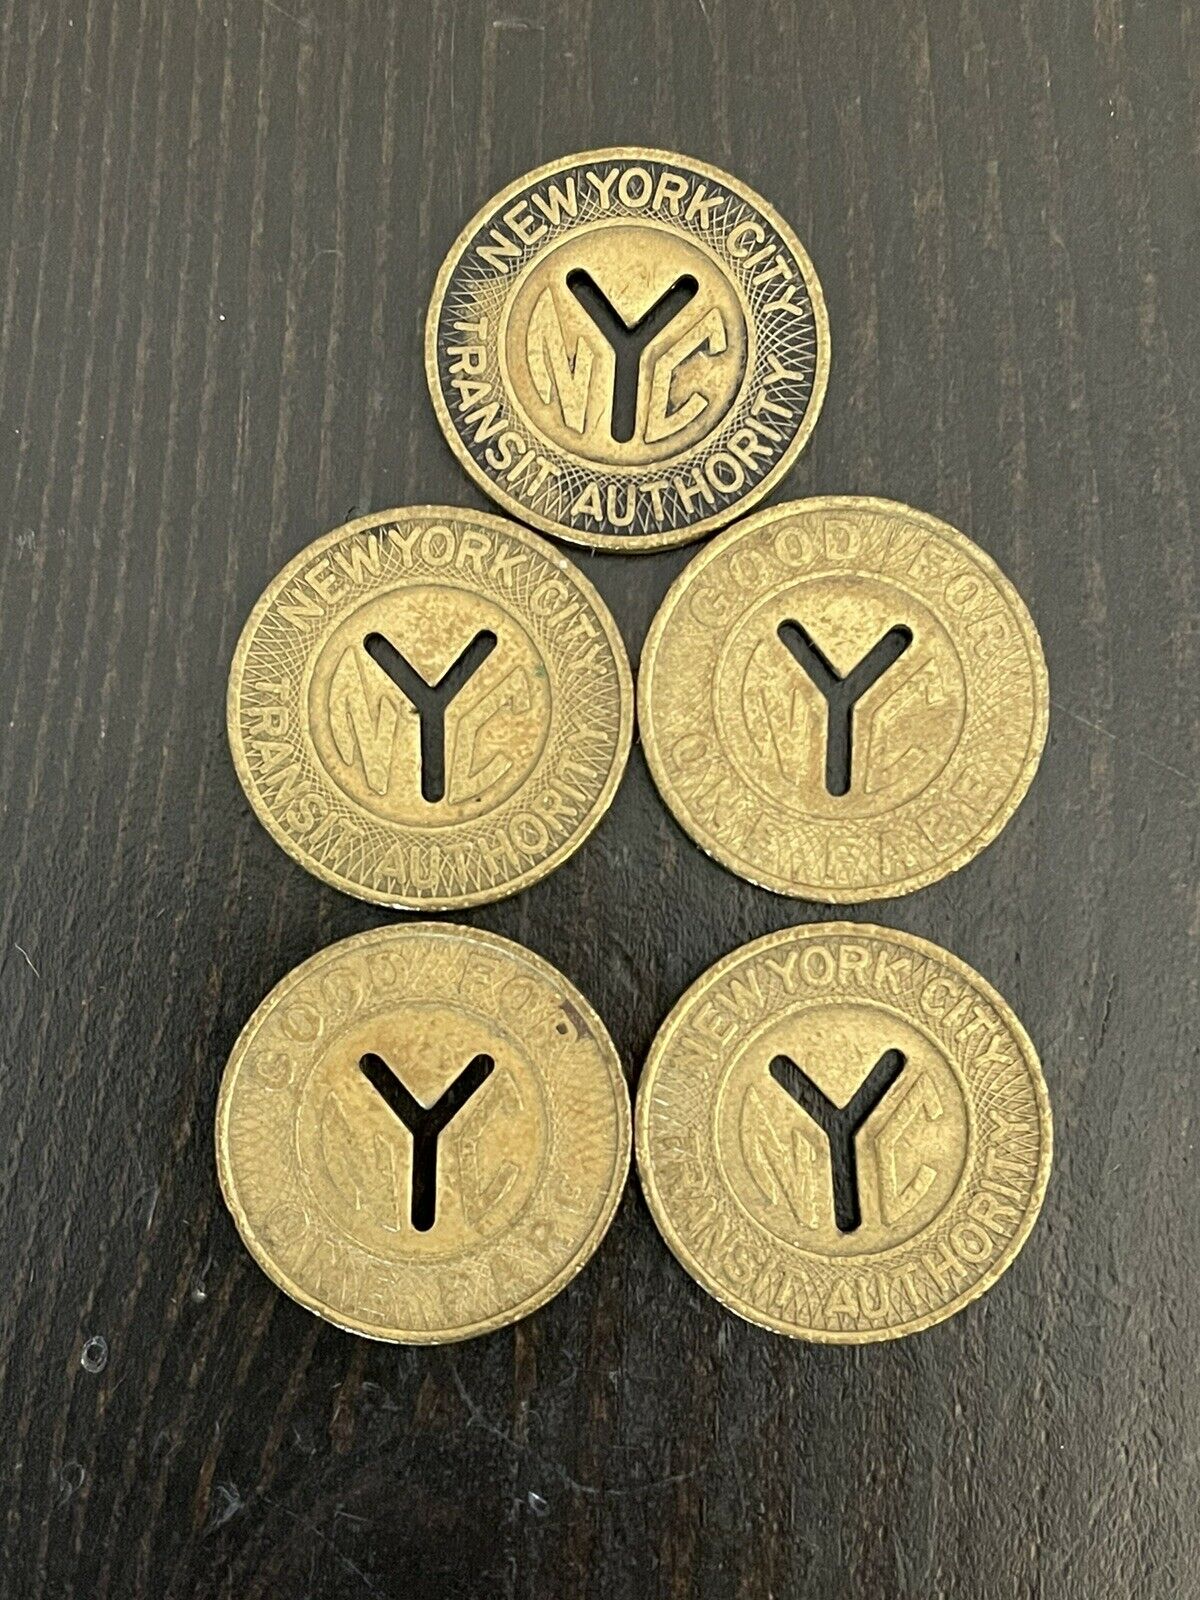 Vintage Nyc Subway "y" Token New York City Transit Authority Lot Of 5 Tokens